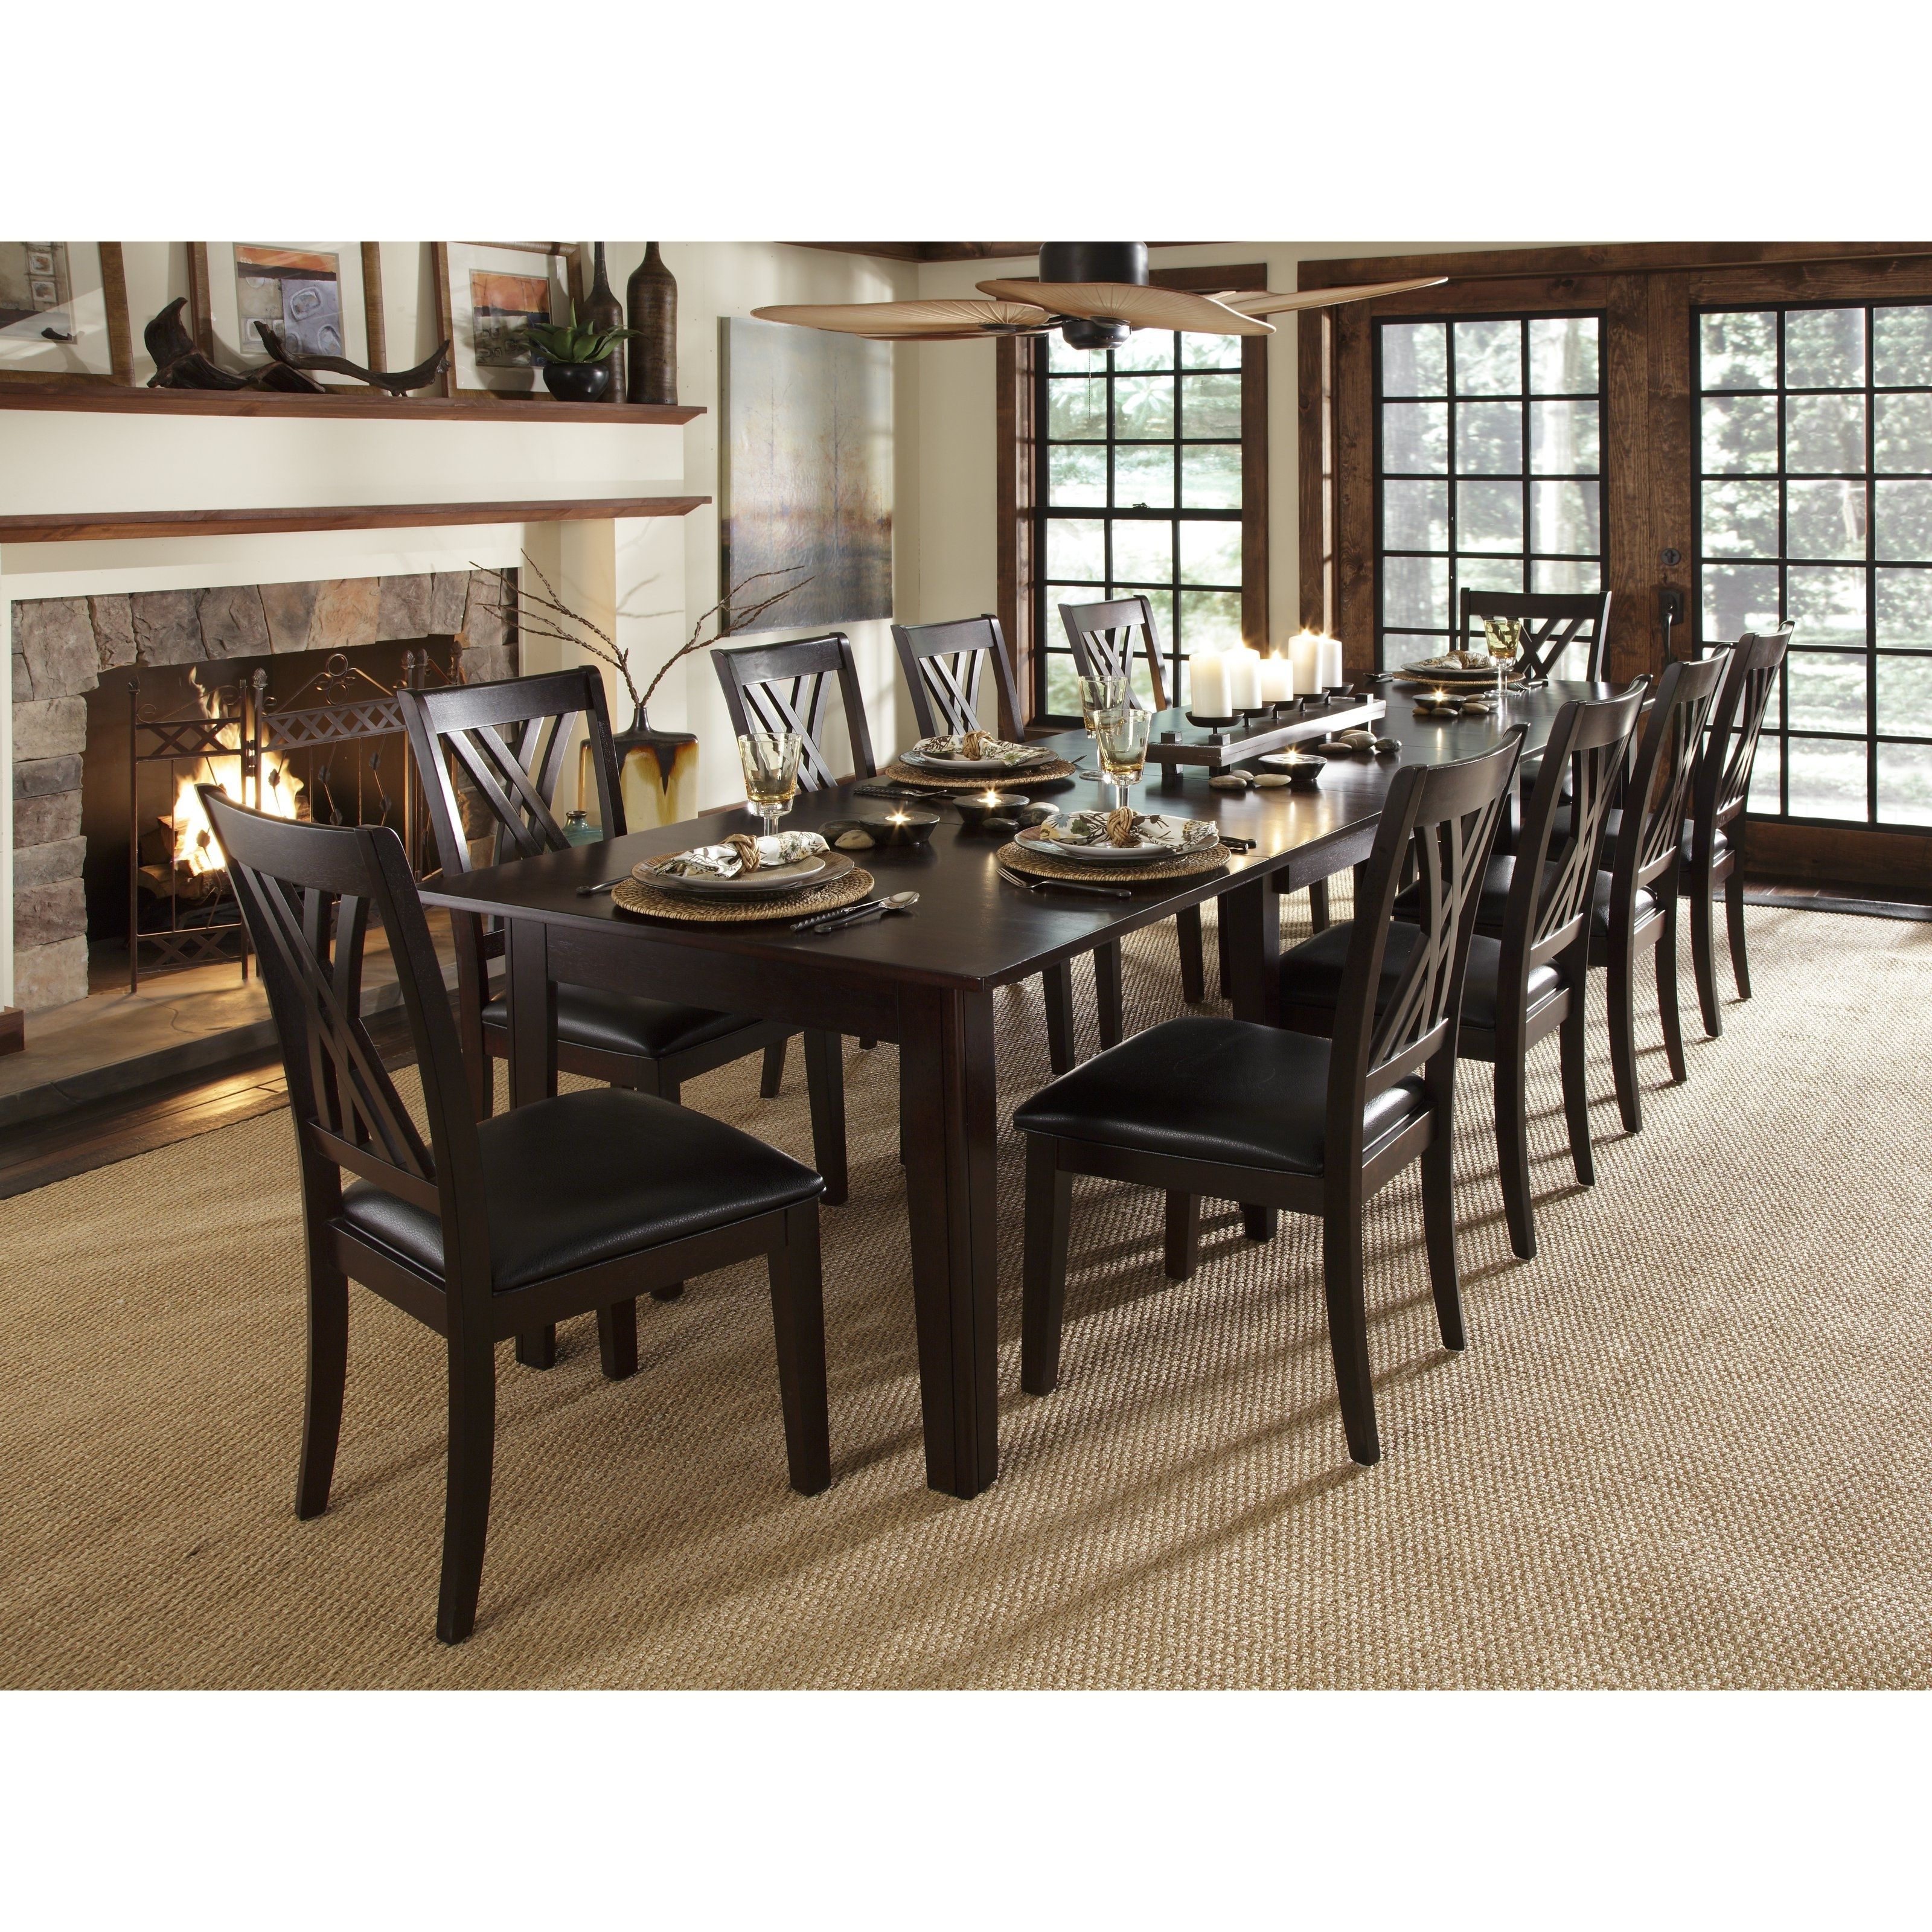 A America Montreal Rectangular Extension Dining Table – Espresso In Most Recently Released Craftsman Rectangle Extension Dining Tables (View 13 of 20)